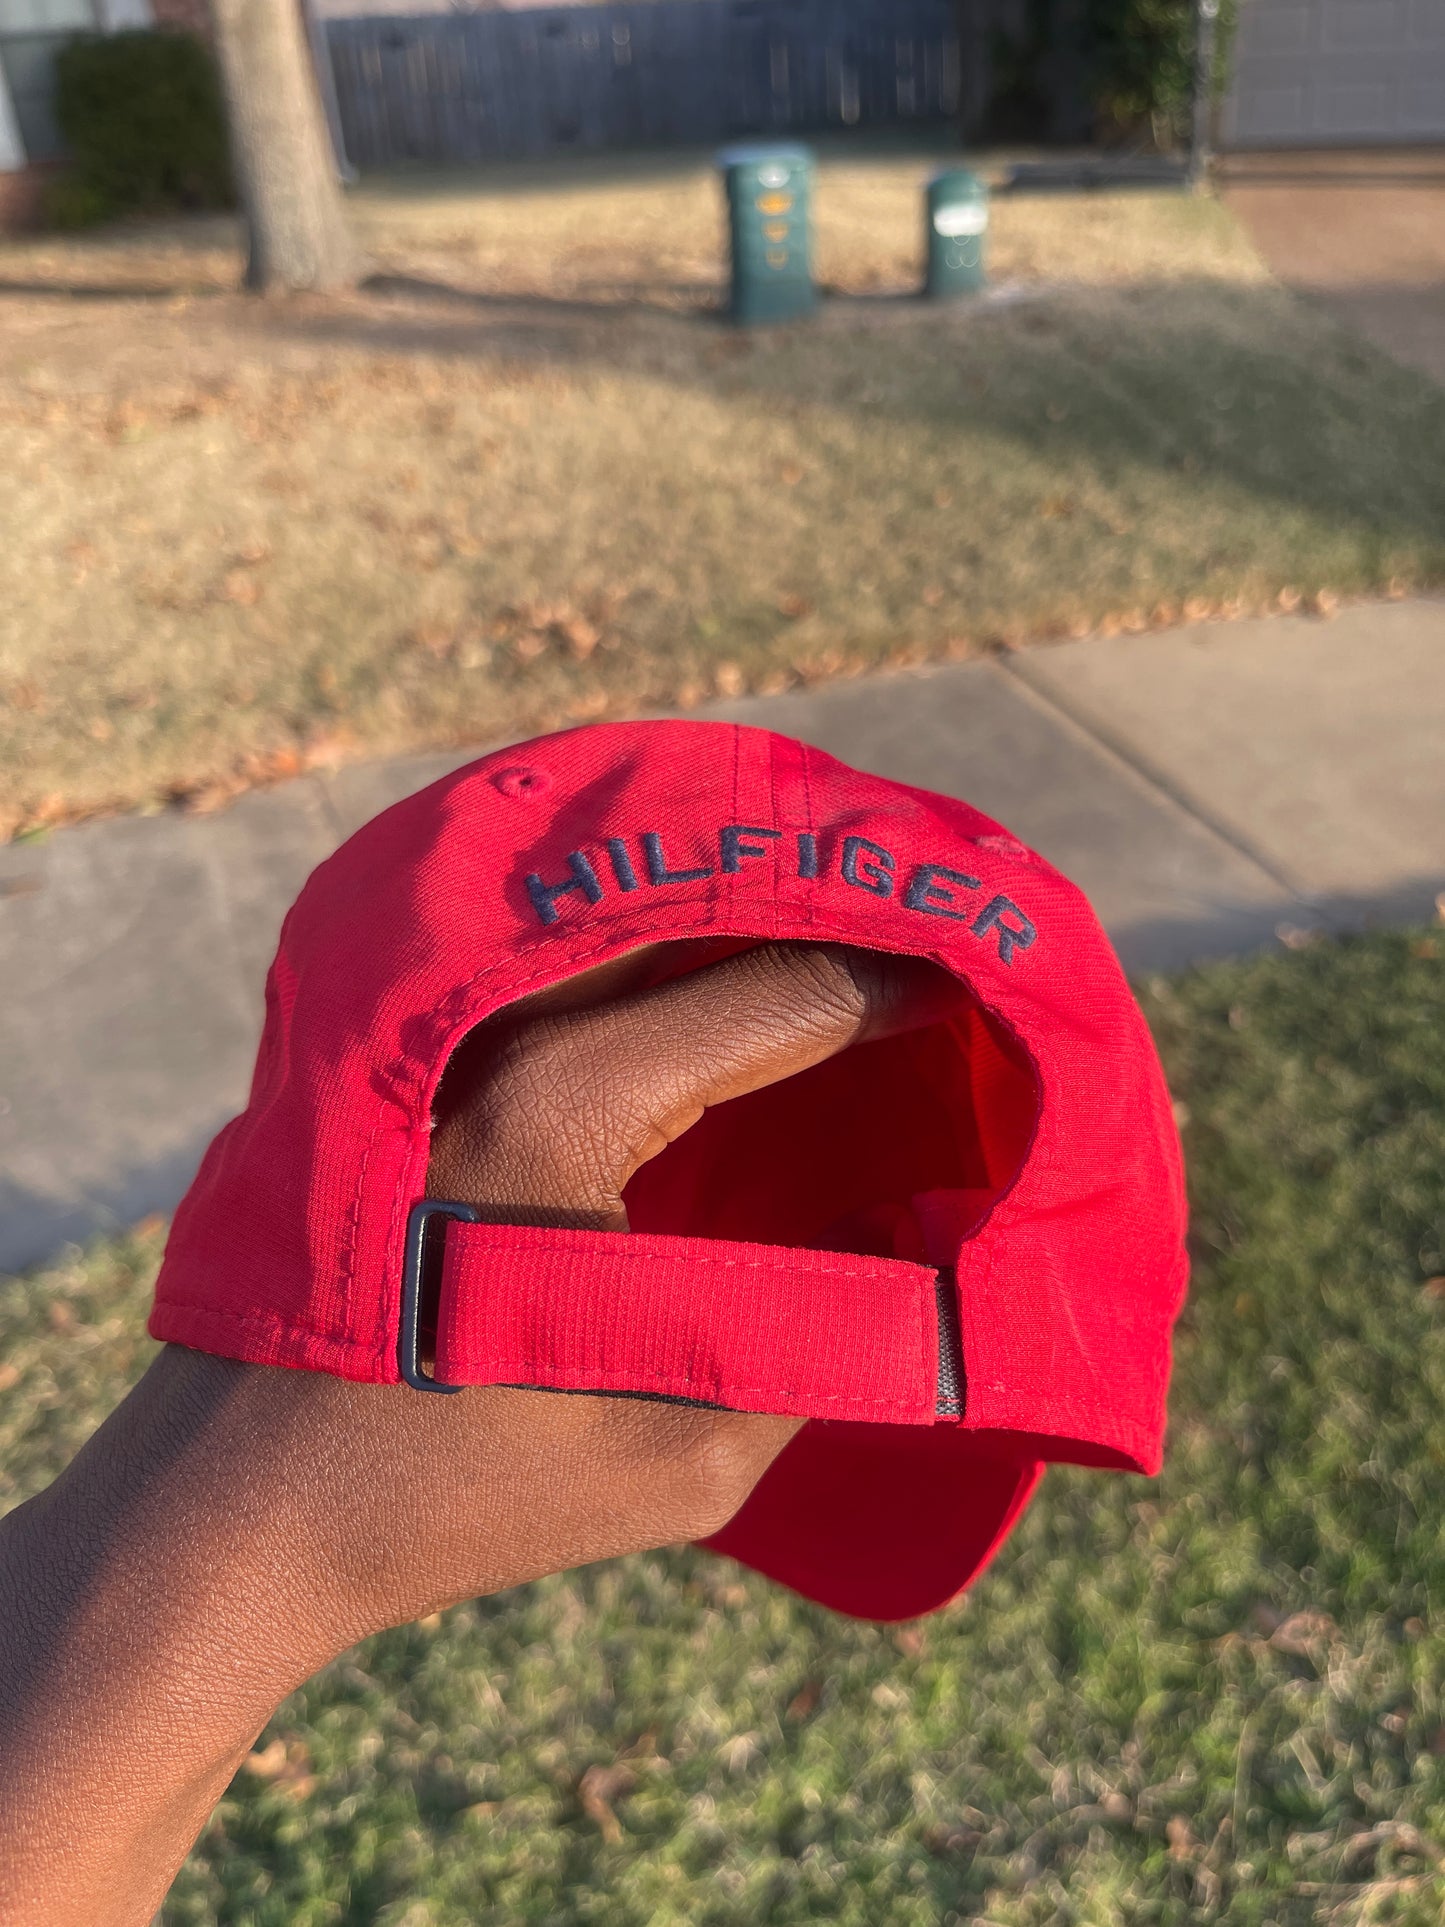 Tommy Hilfiger cap red adults one size